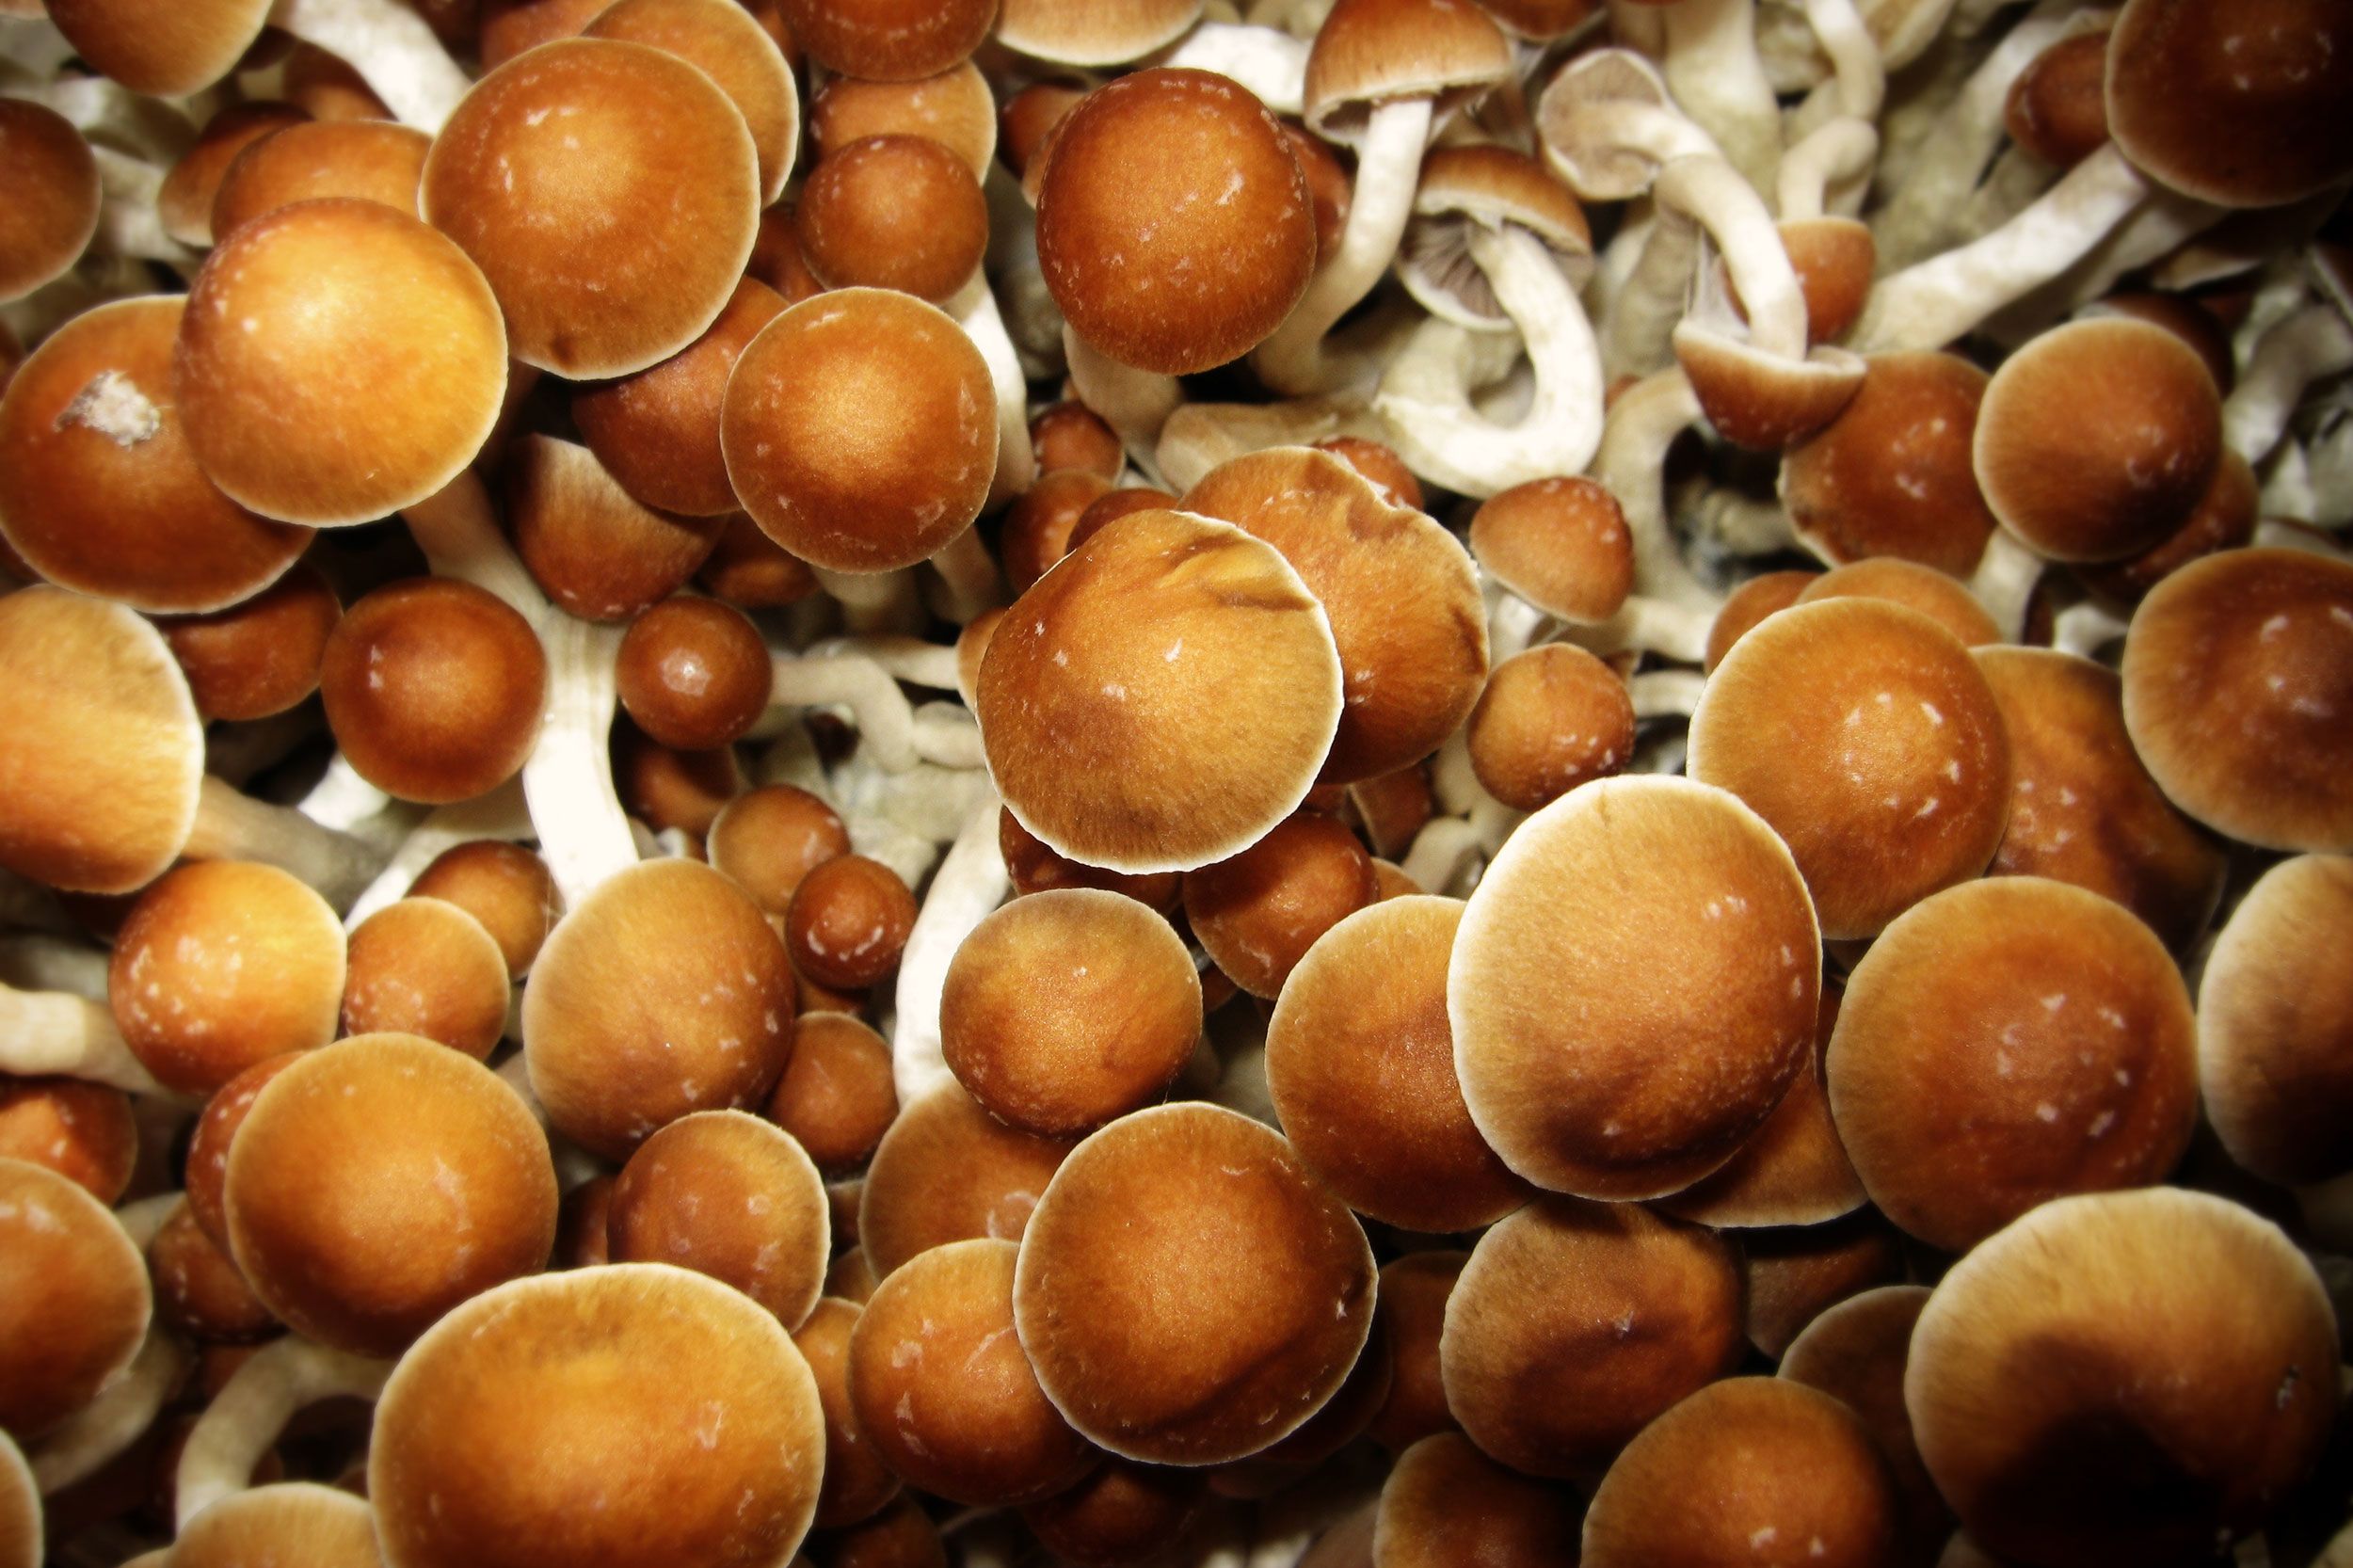 Psychedelic mushroom benefits are popping up all over | CNN